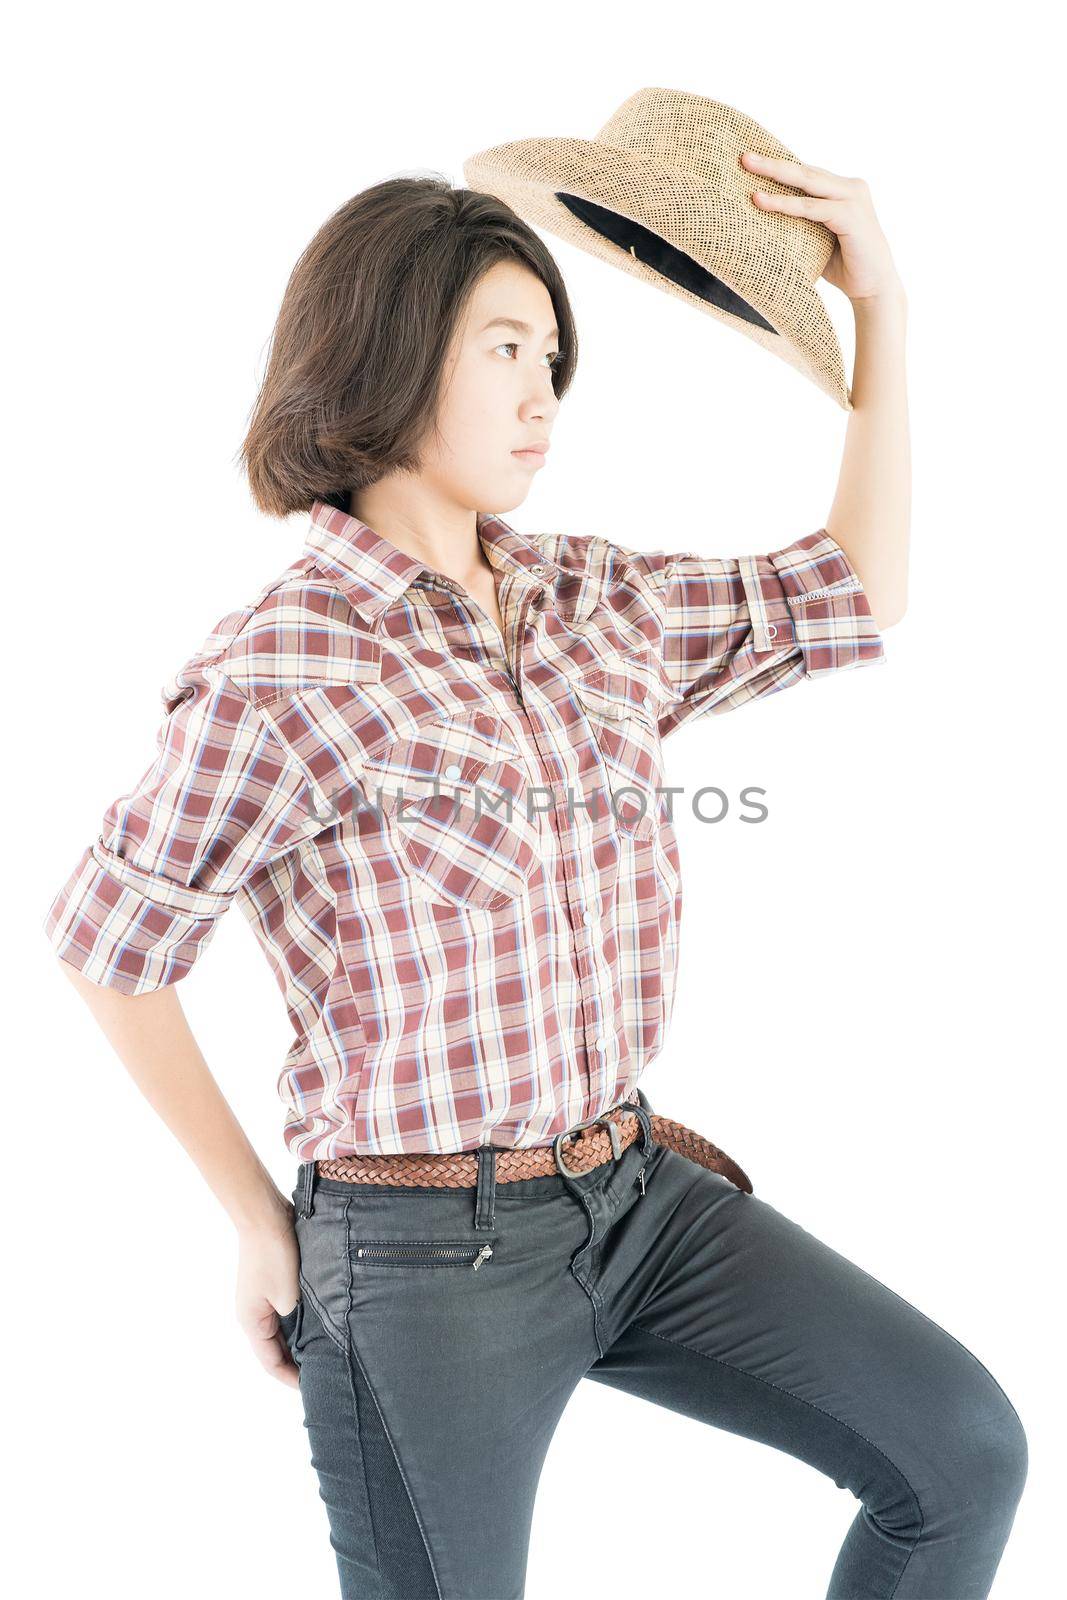 Young woman in a cowboy hat and plaid shirt with hand on her hat by stoonn